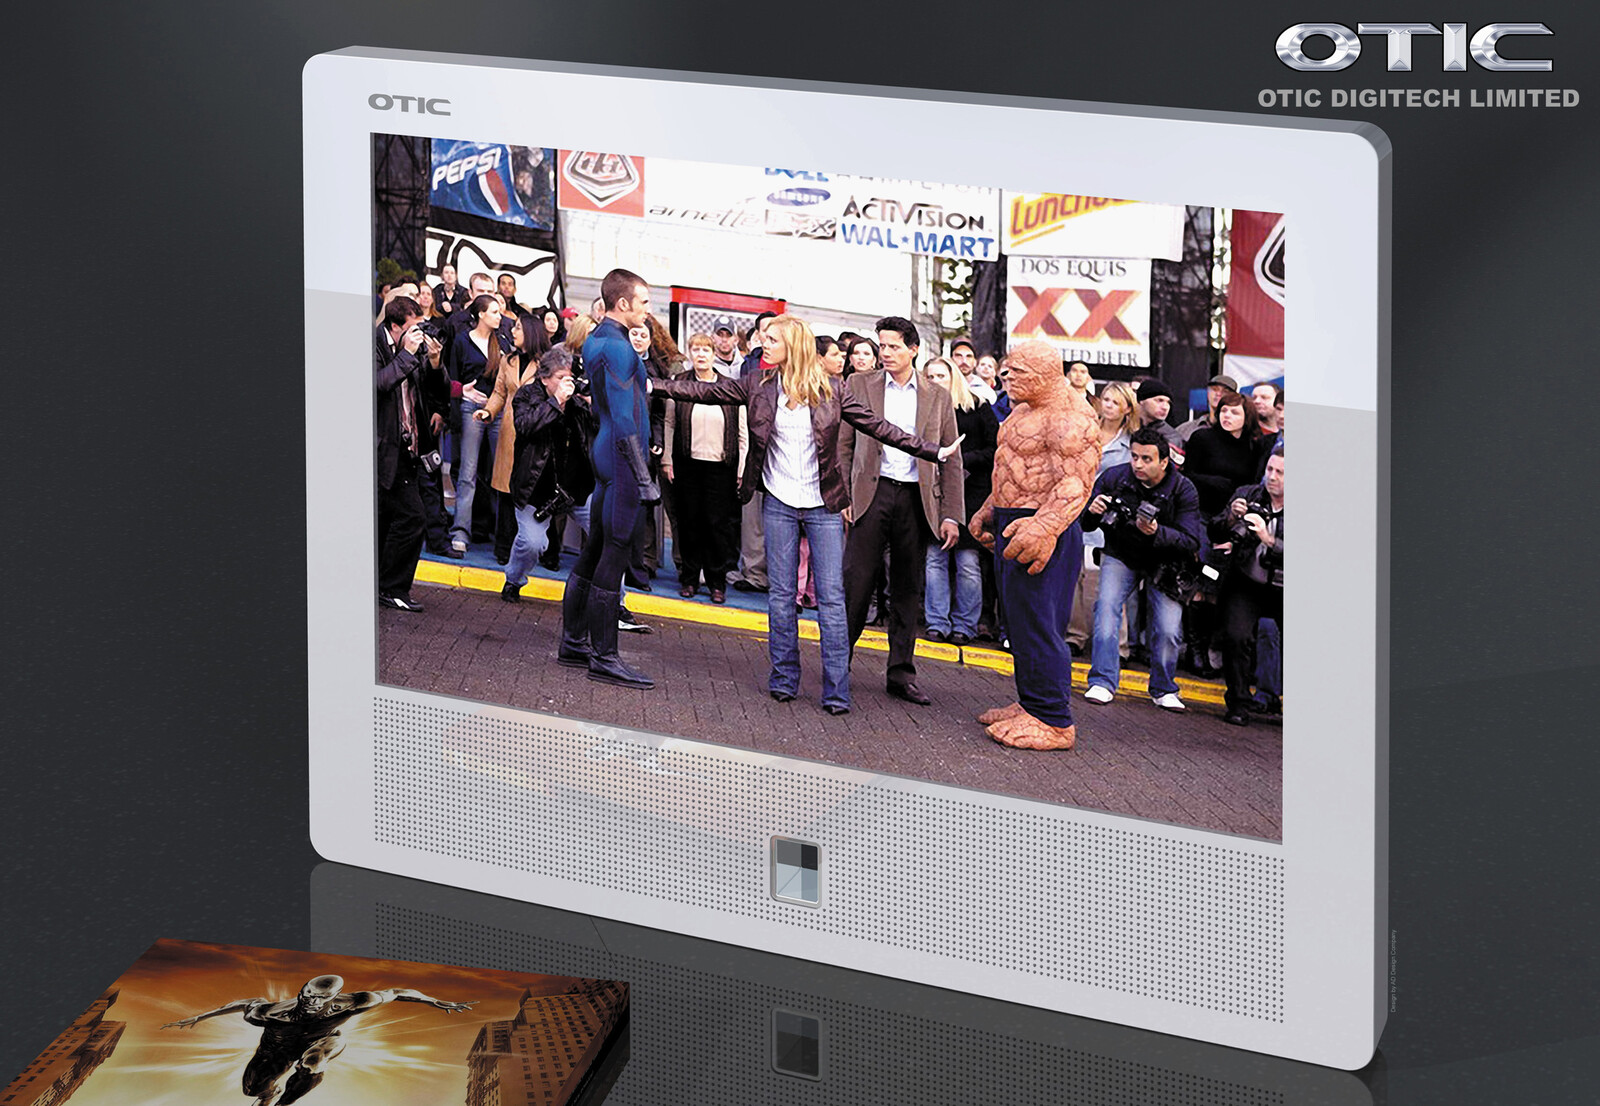 💎 Portable Mini LED TV | Design by Leung Chung Kwan on 2008 💎
Brand Name︰OTIC | Client︰OTIC Limited